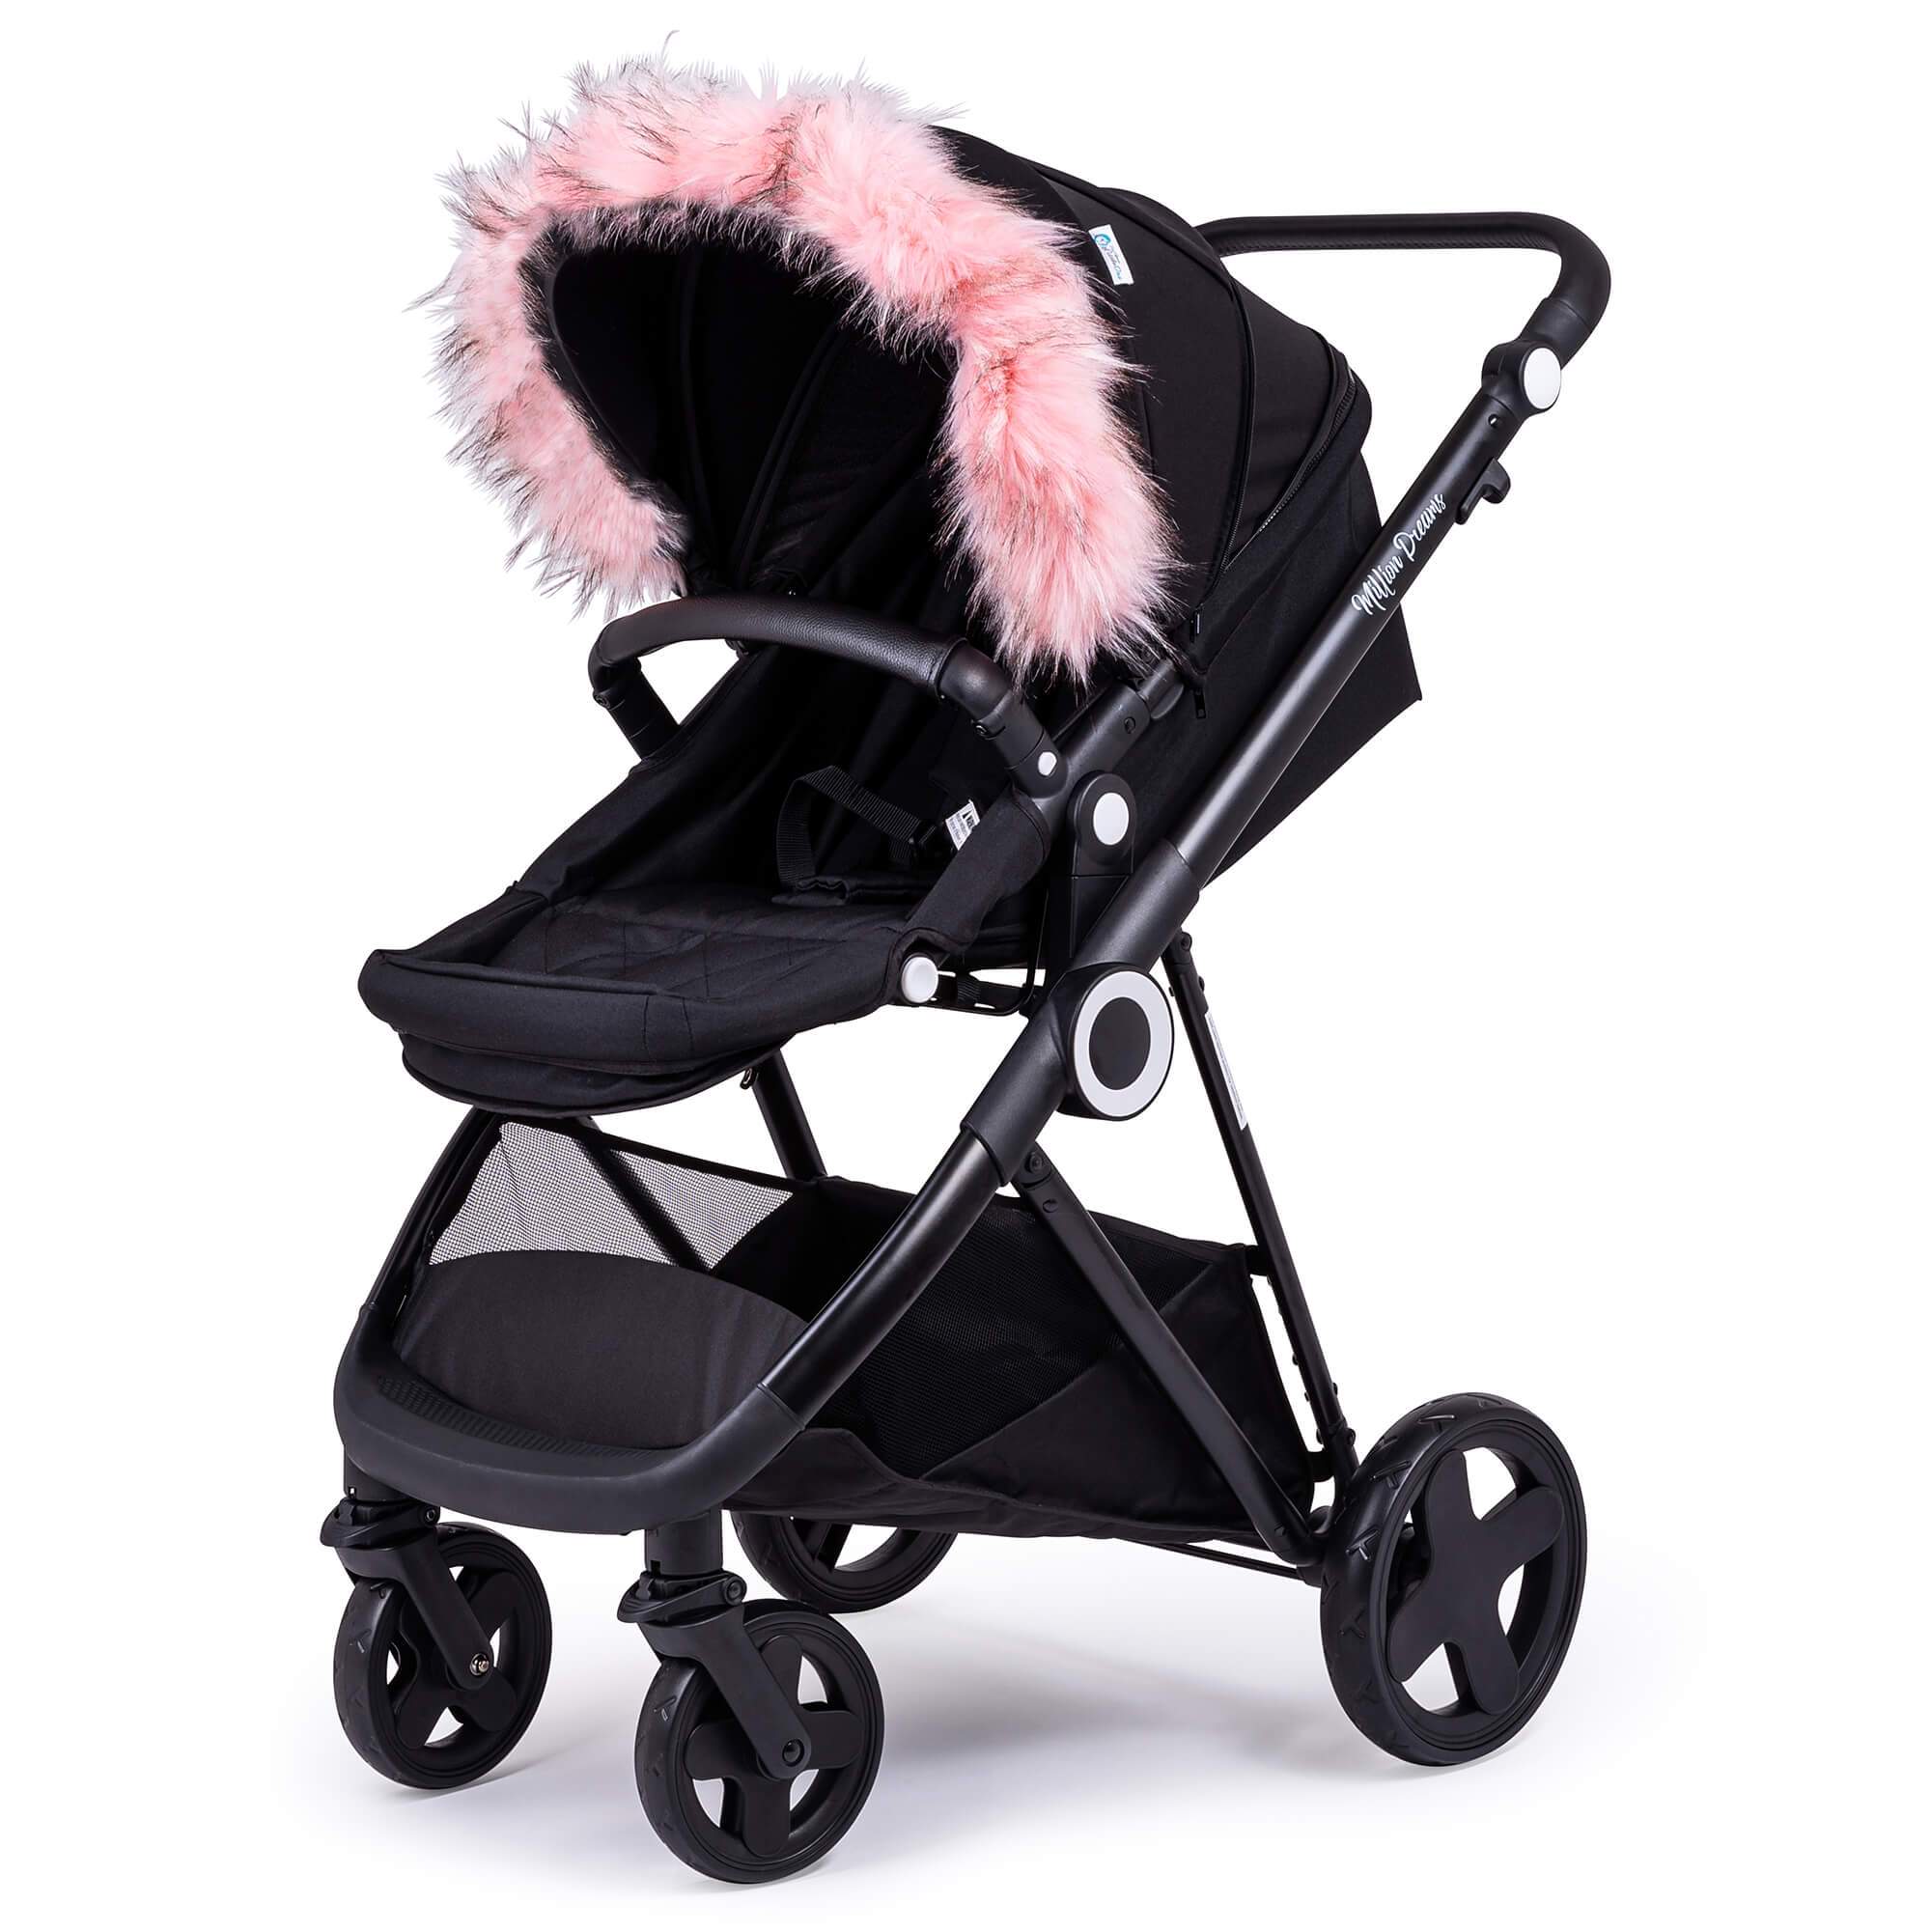 Pram Fur Hood Trim Attachment for Pushchair Compatible with Koelstra - For Your Little One